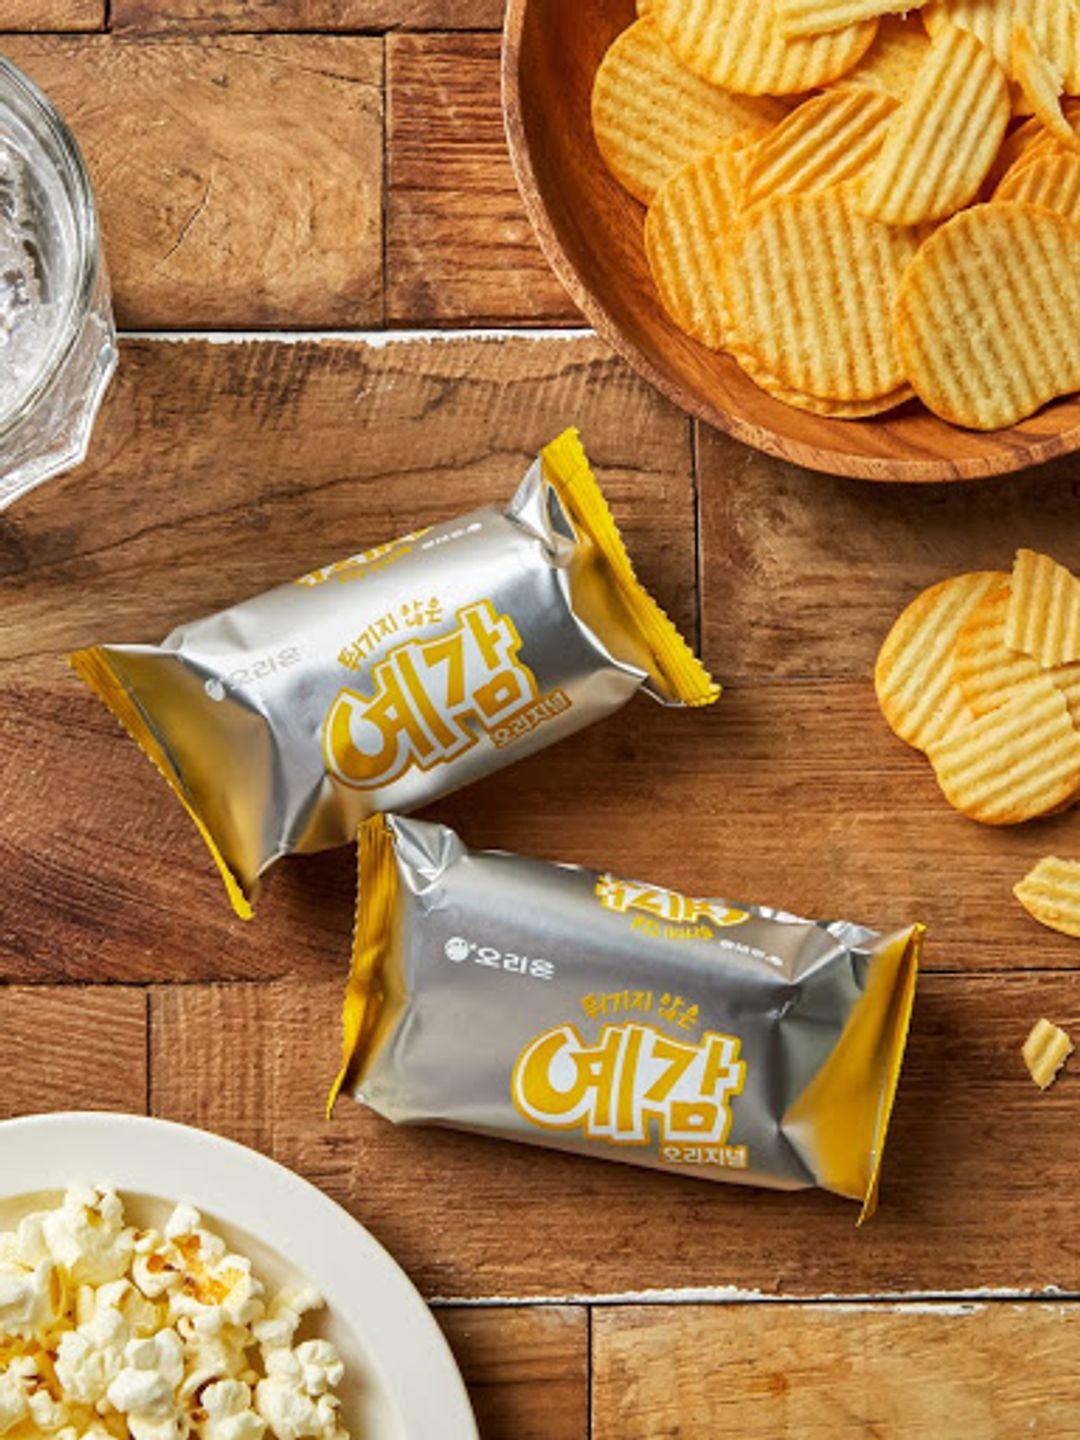 korean brand orion's yegam original flavor packs decorated with chips and popcorn